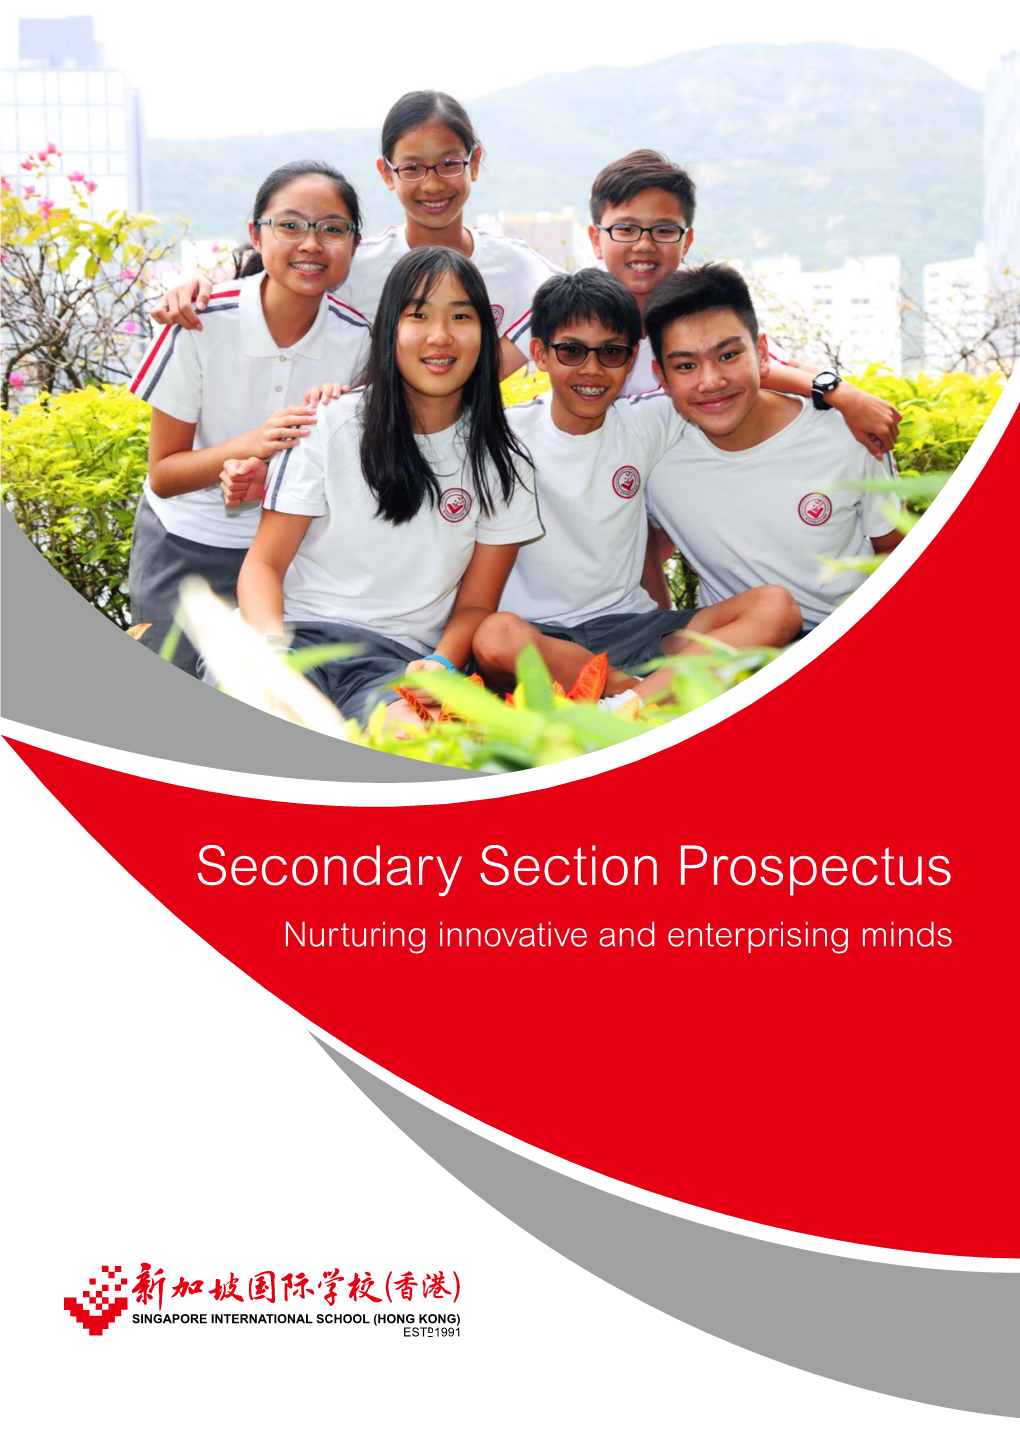 Secondary Section Prospectus Nurturing Innovative and Enterprising Minds Contents Our Values